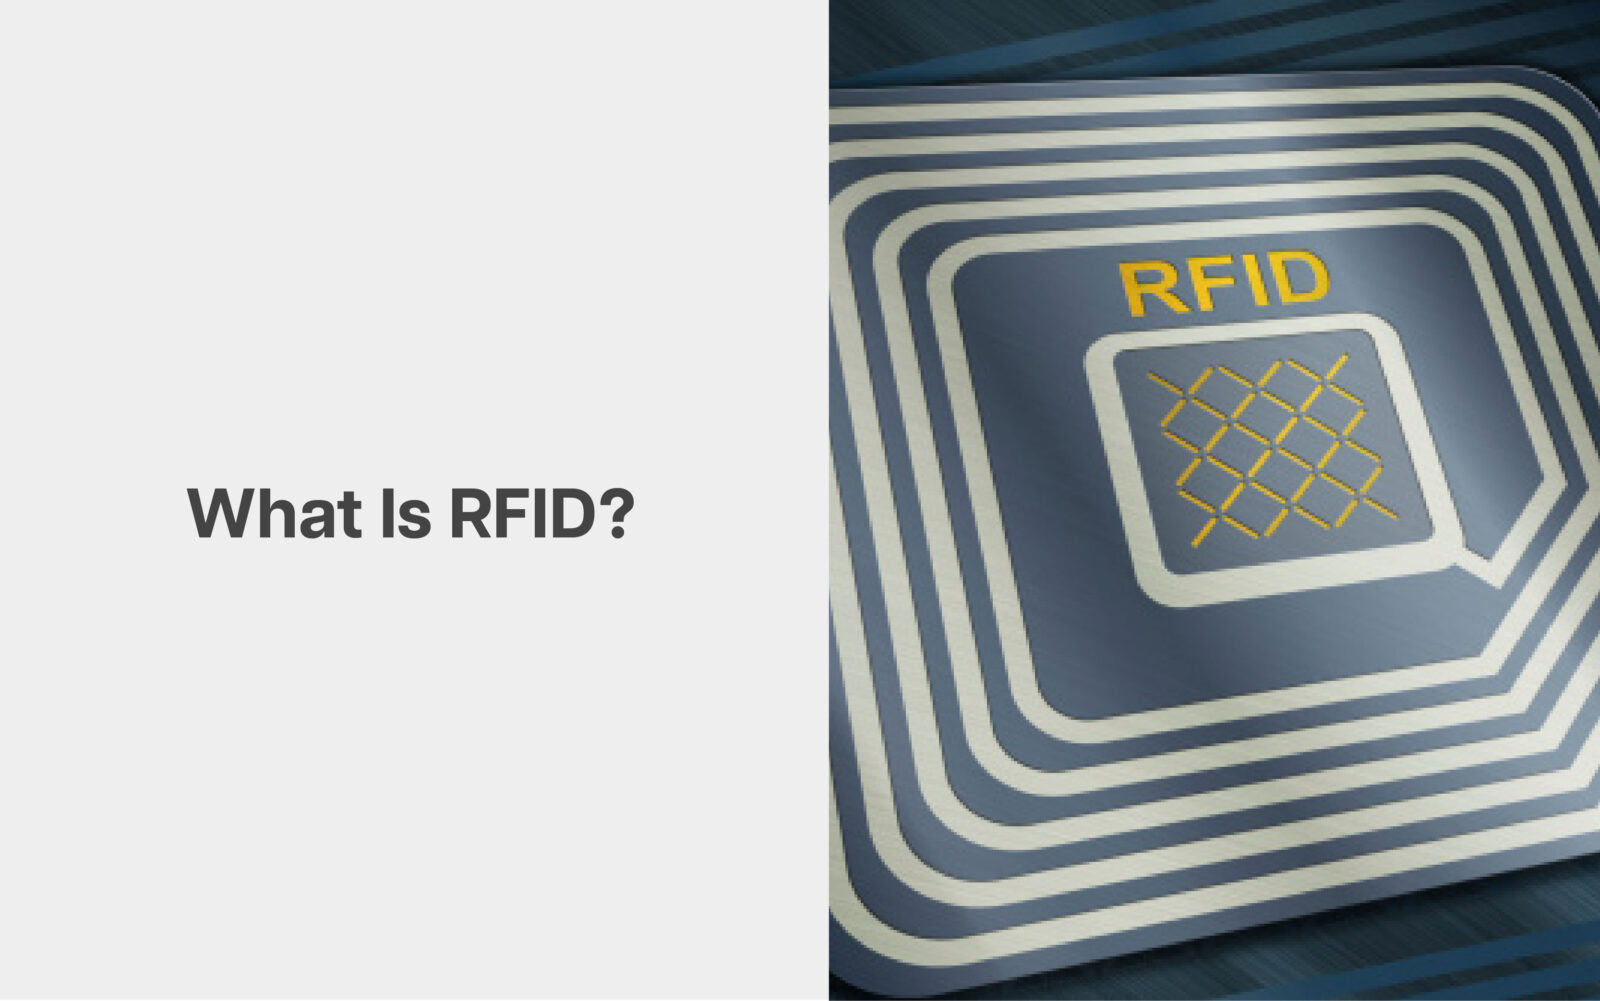 What Is RFID?